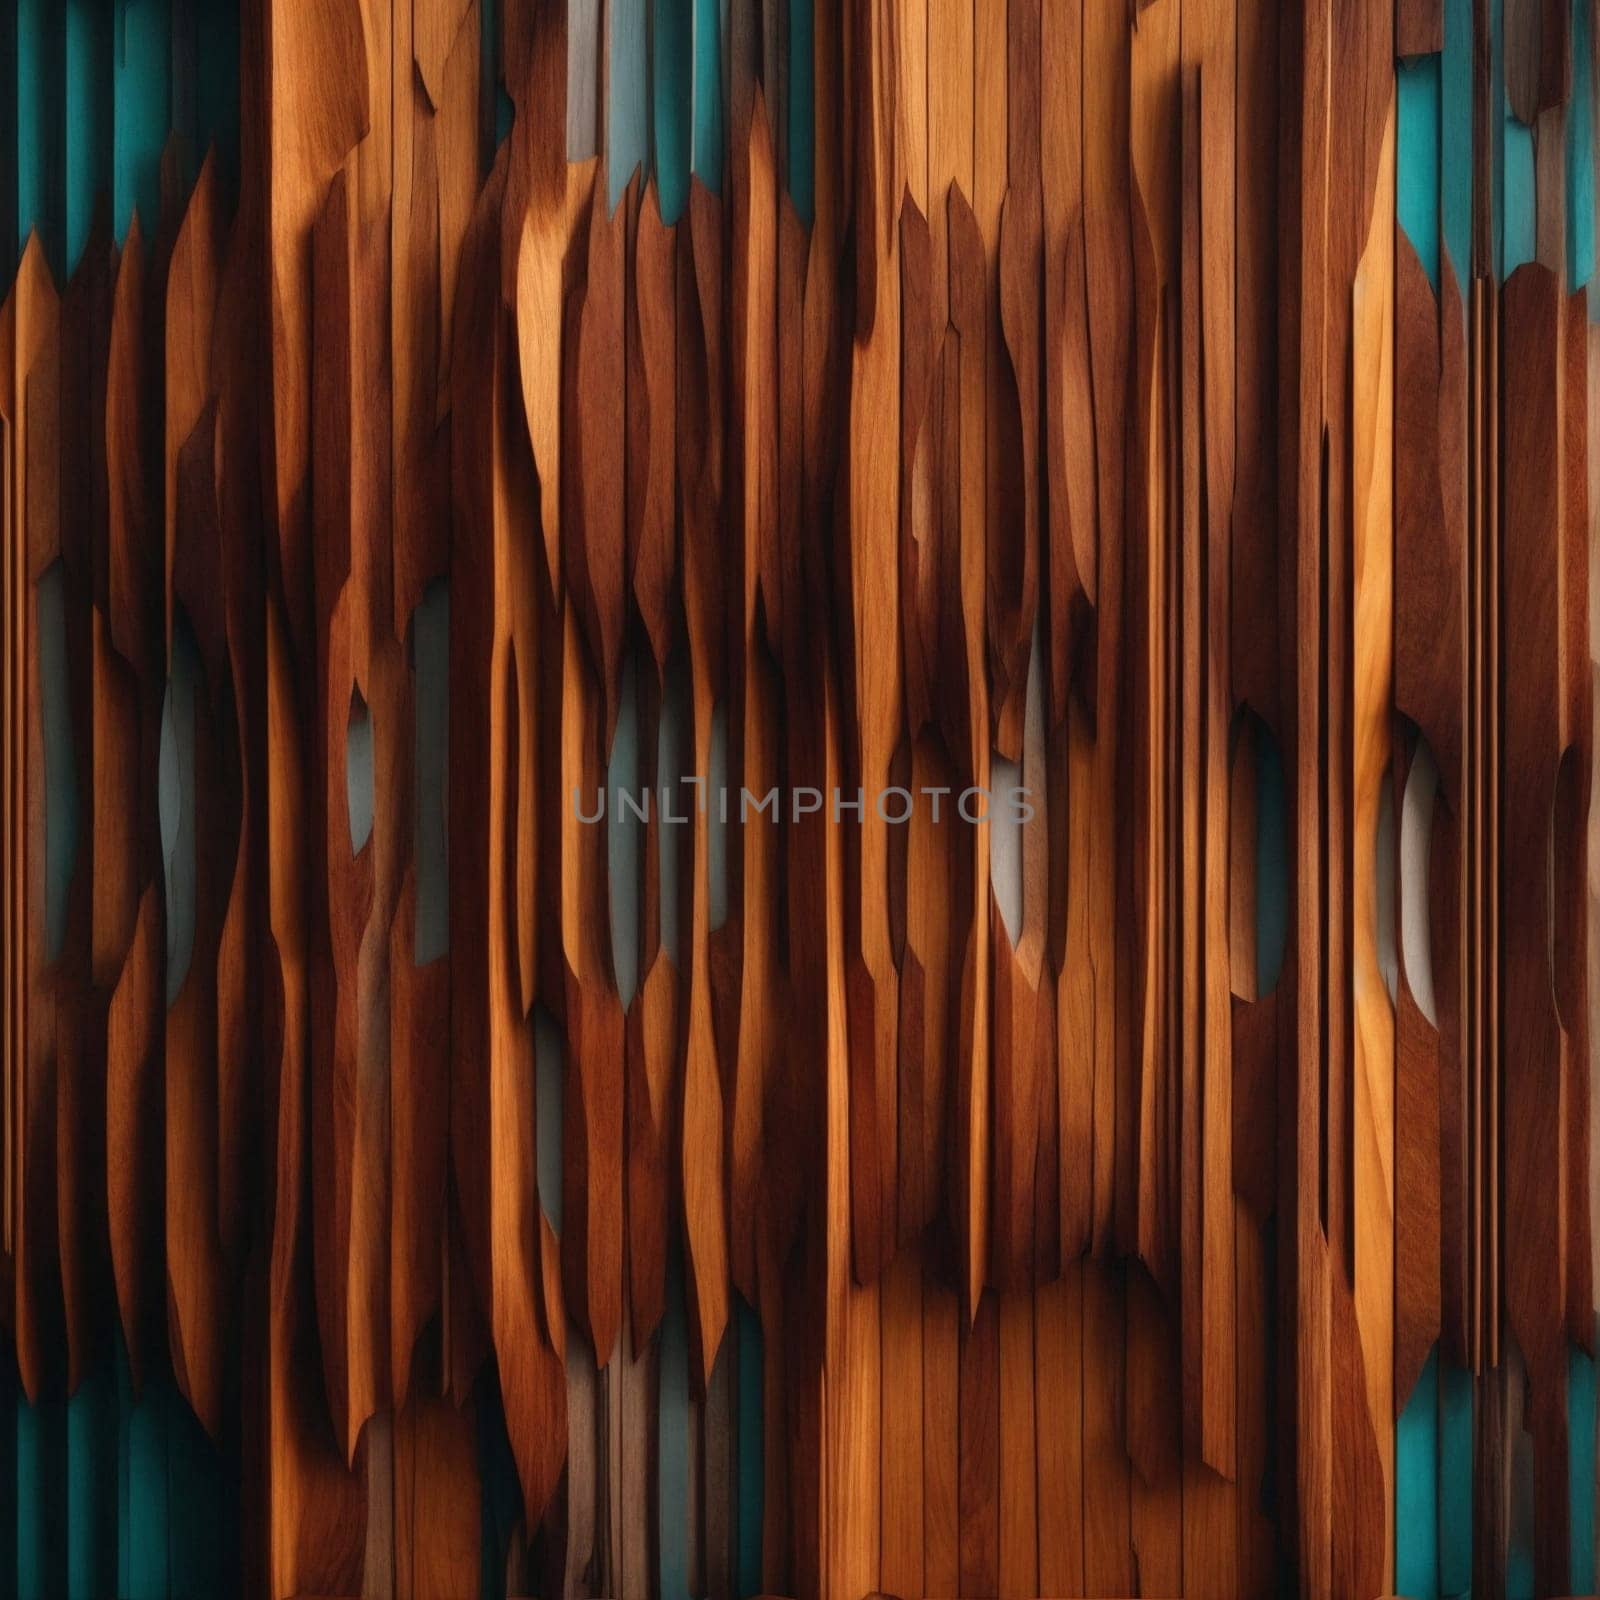 This close-up photo captures the texture and details of a wooden wall, showcasing the natural beauty of the wood grain.